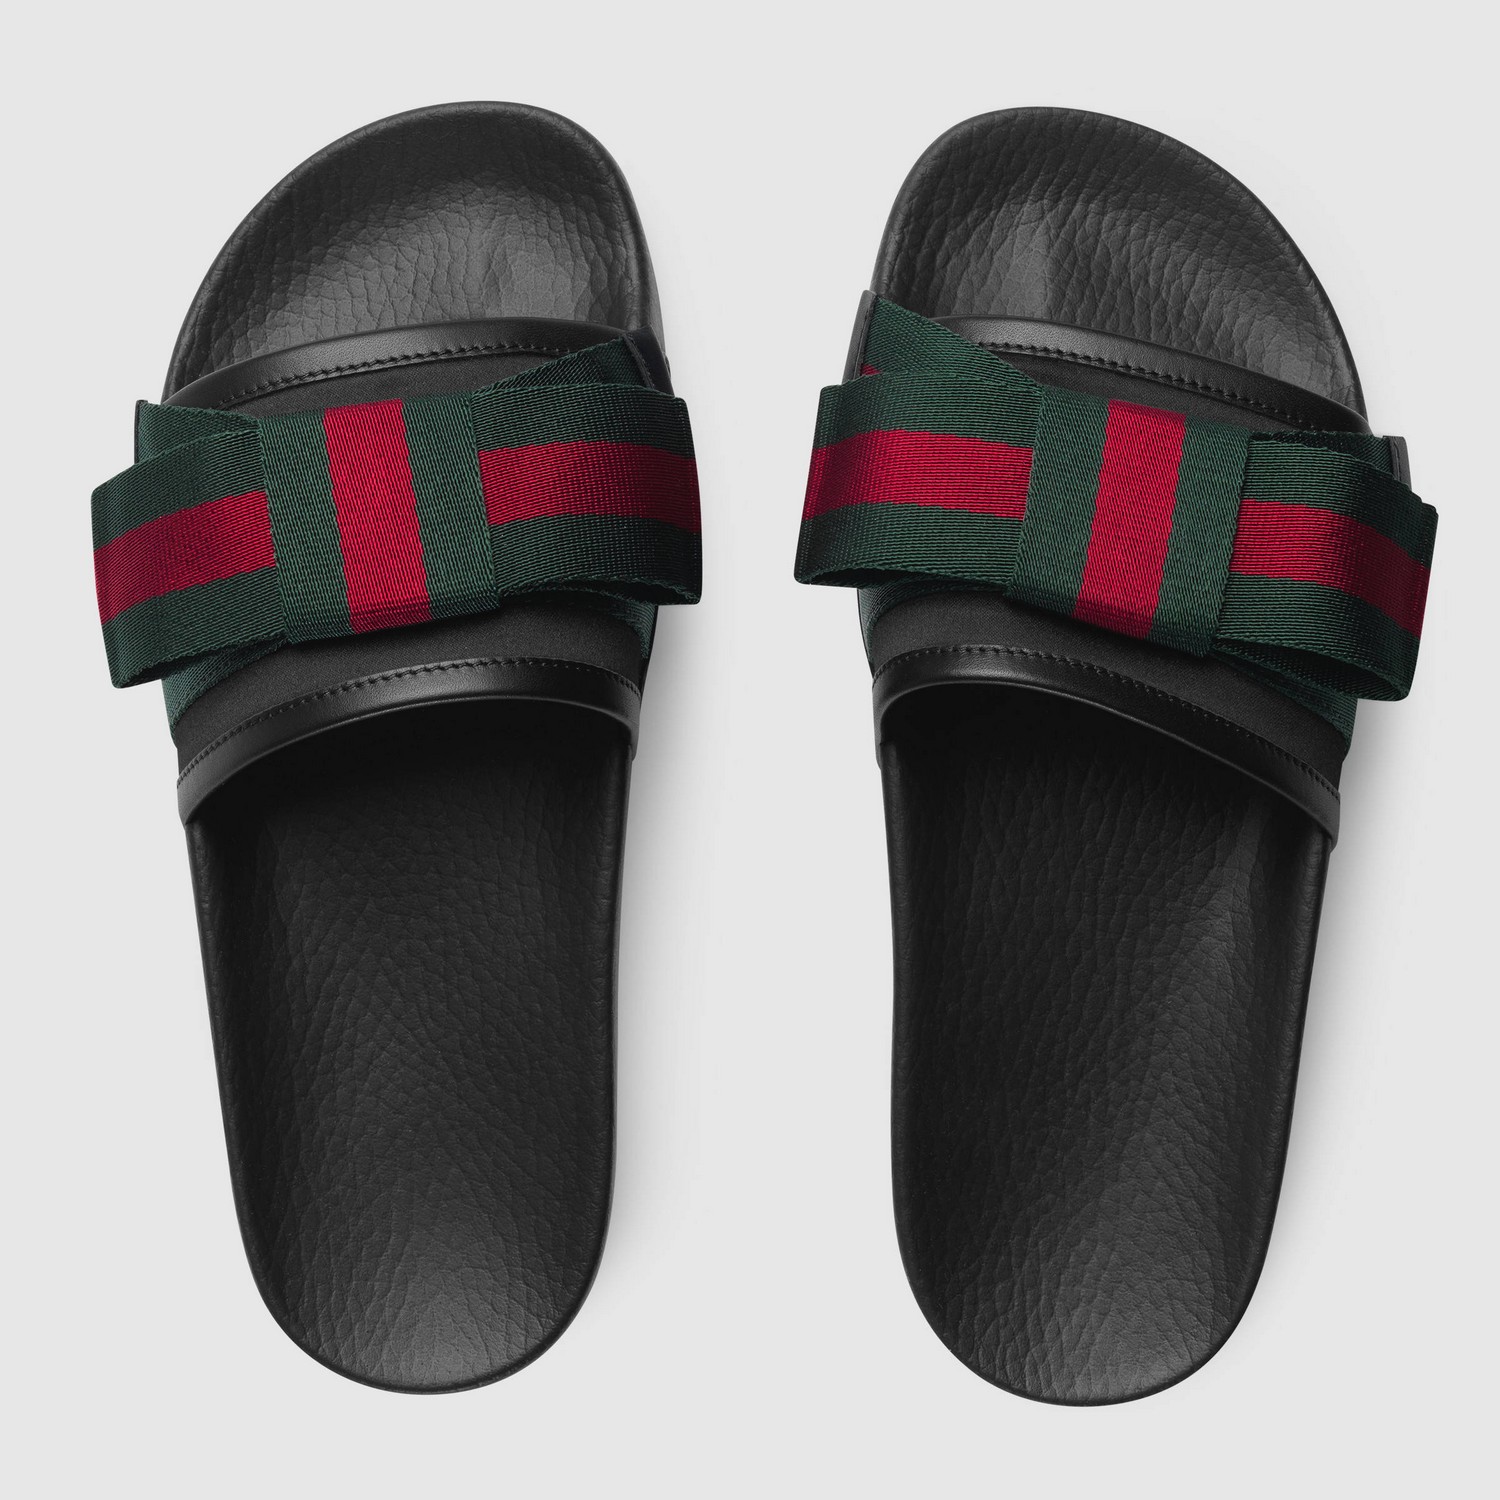 D.I.Y. Gucci Flip Flops, Cheap Thrills, Gucci flip flops are iconic but  they're expensive af. Here's how to make your own on the cheap., By Cheap  Thrills